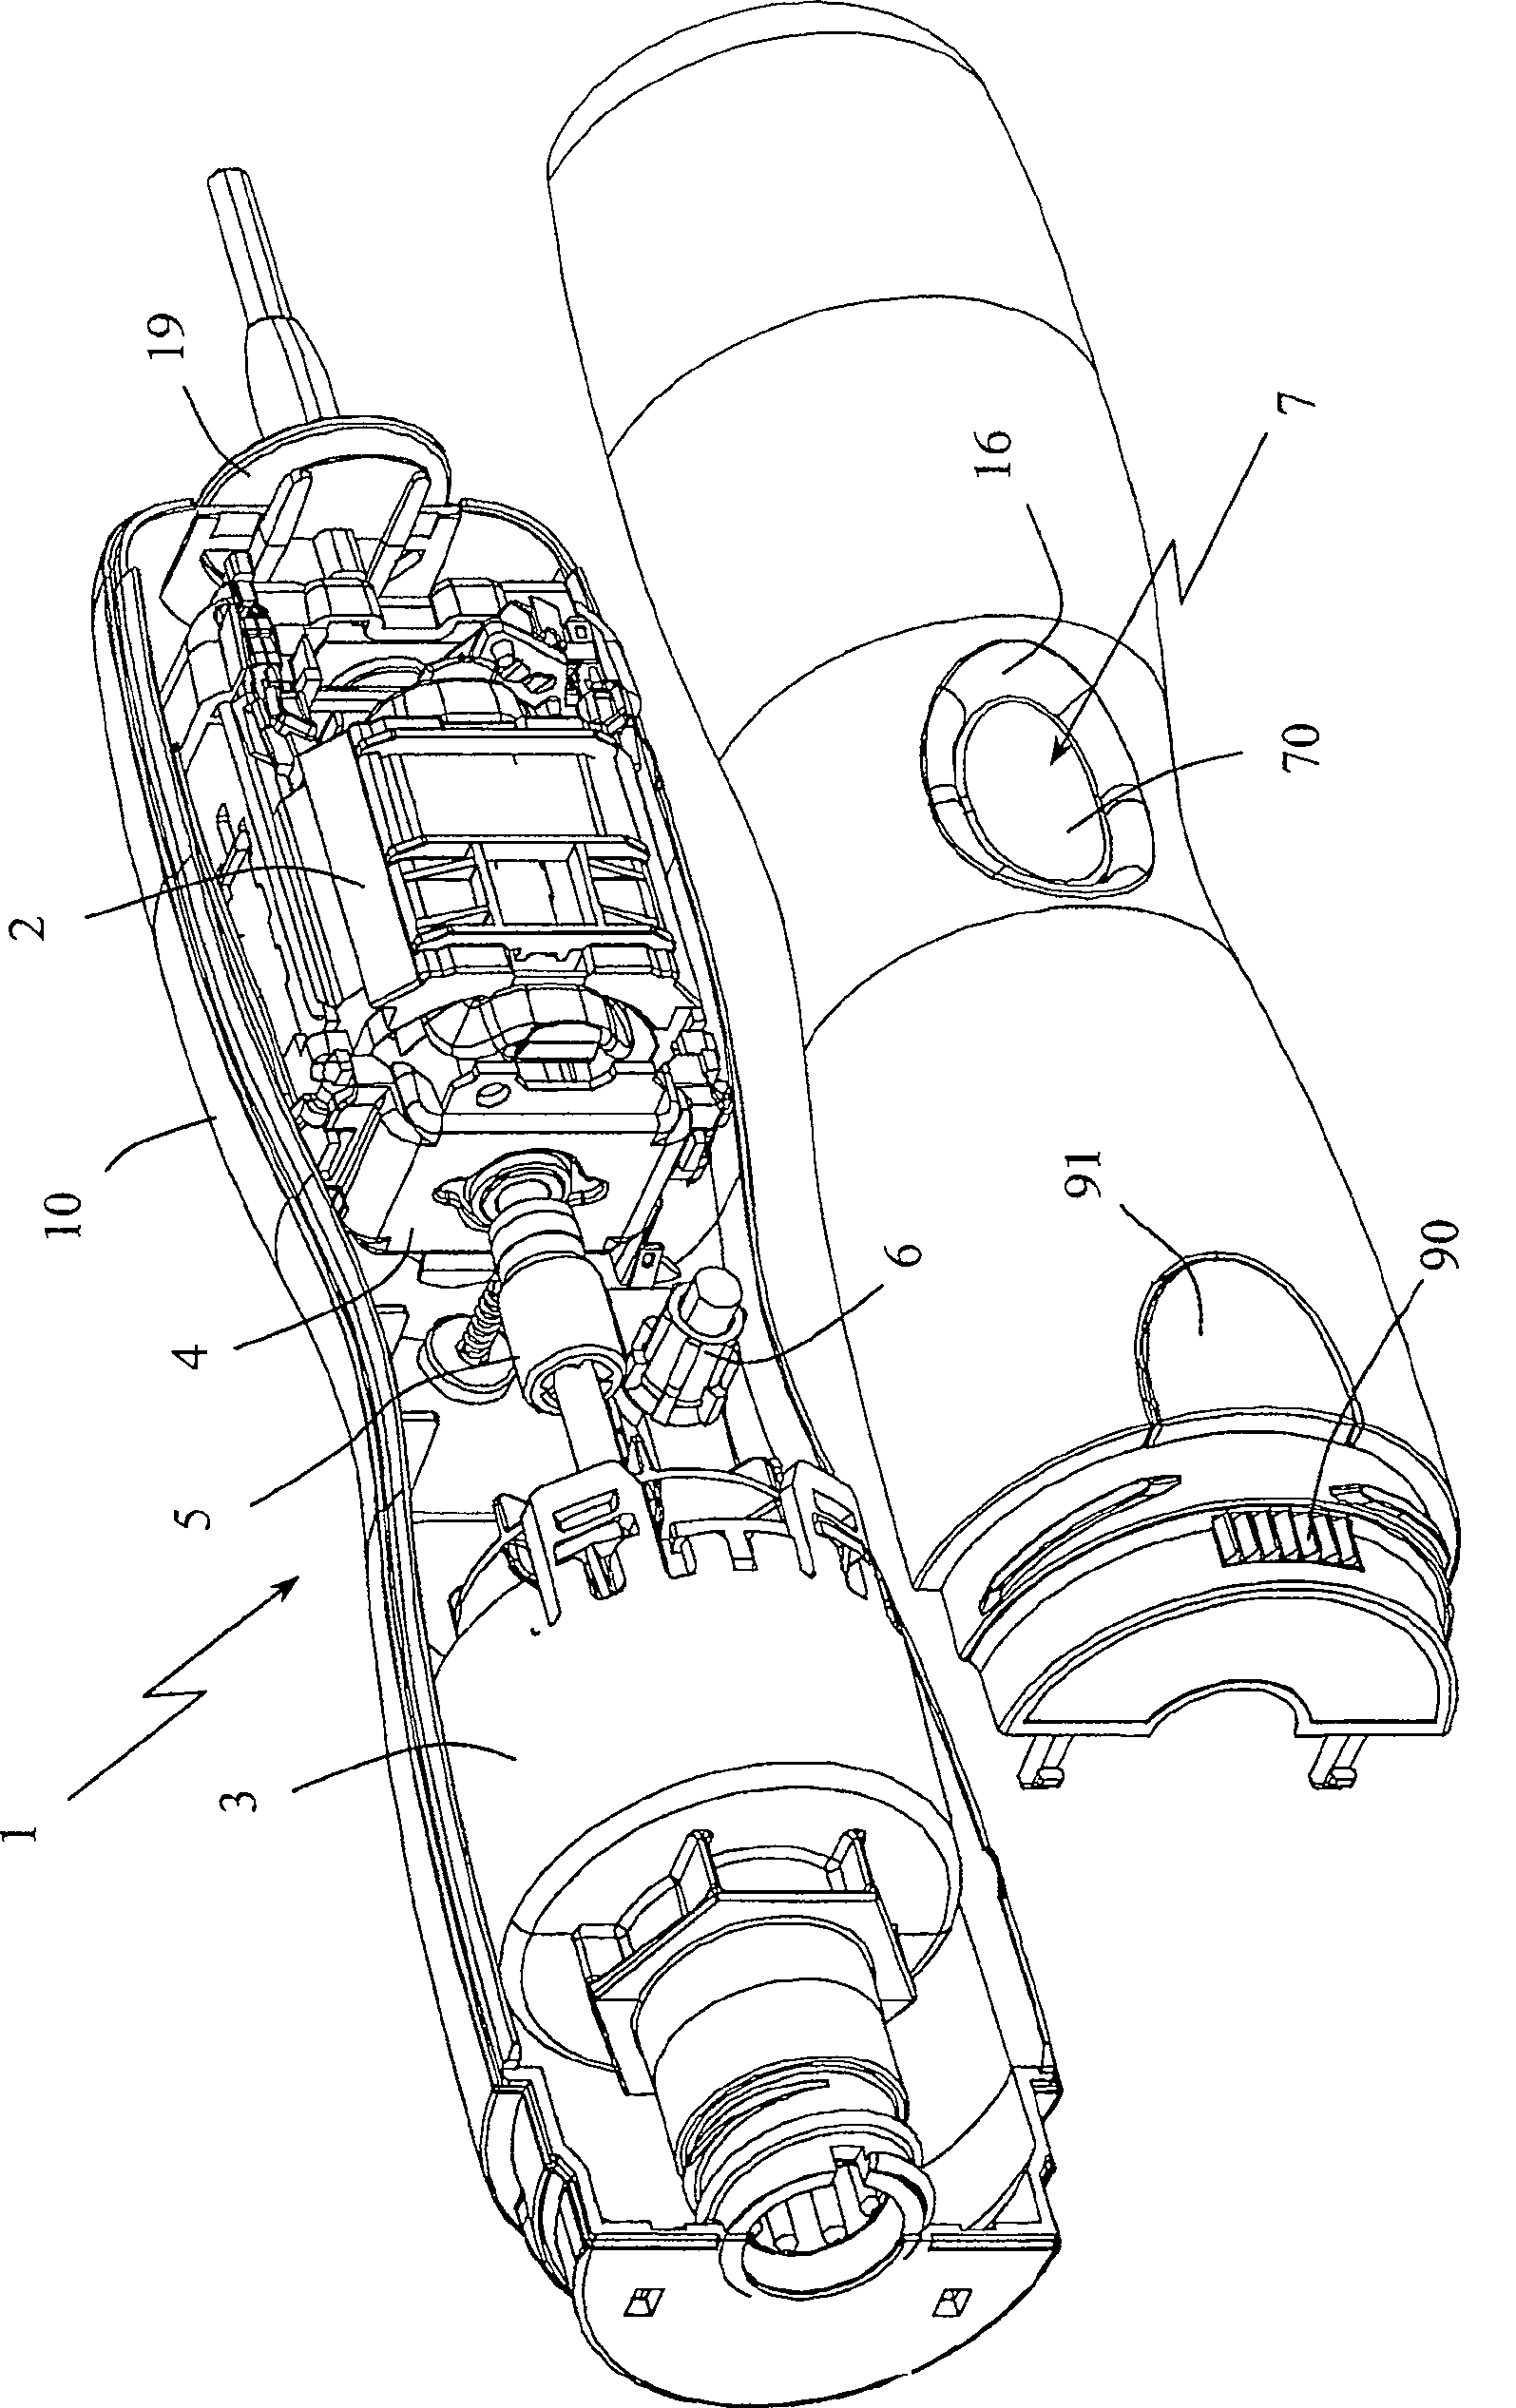 Housing for electrical household cooking appliance designed to be hand-held in different positions